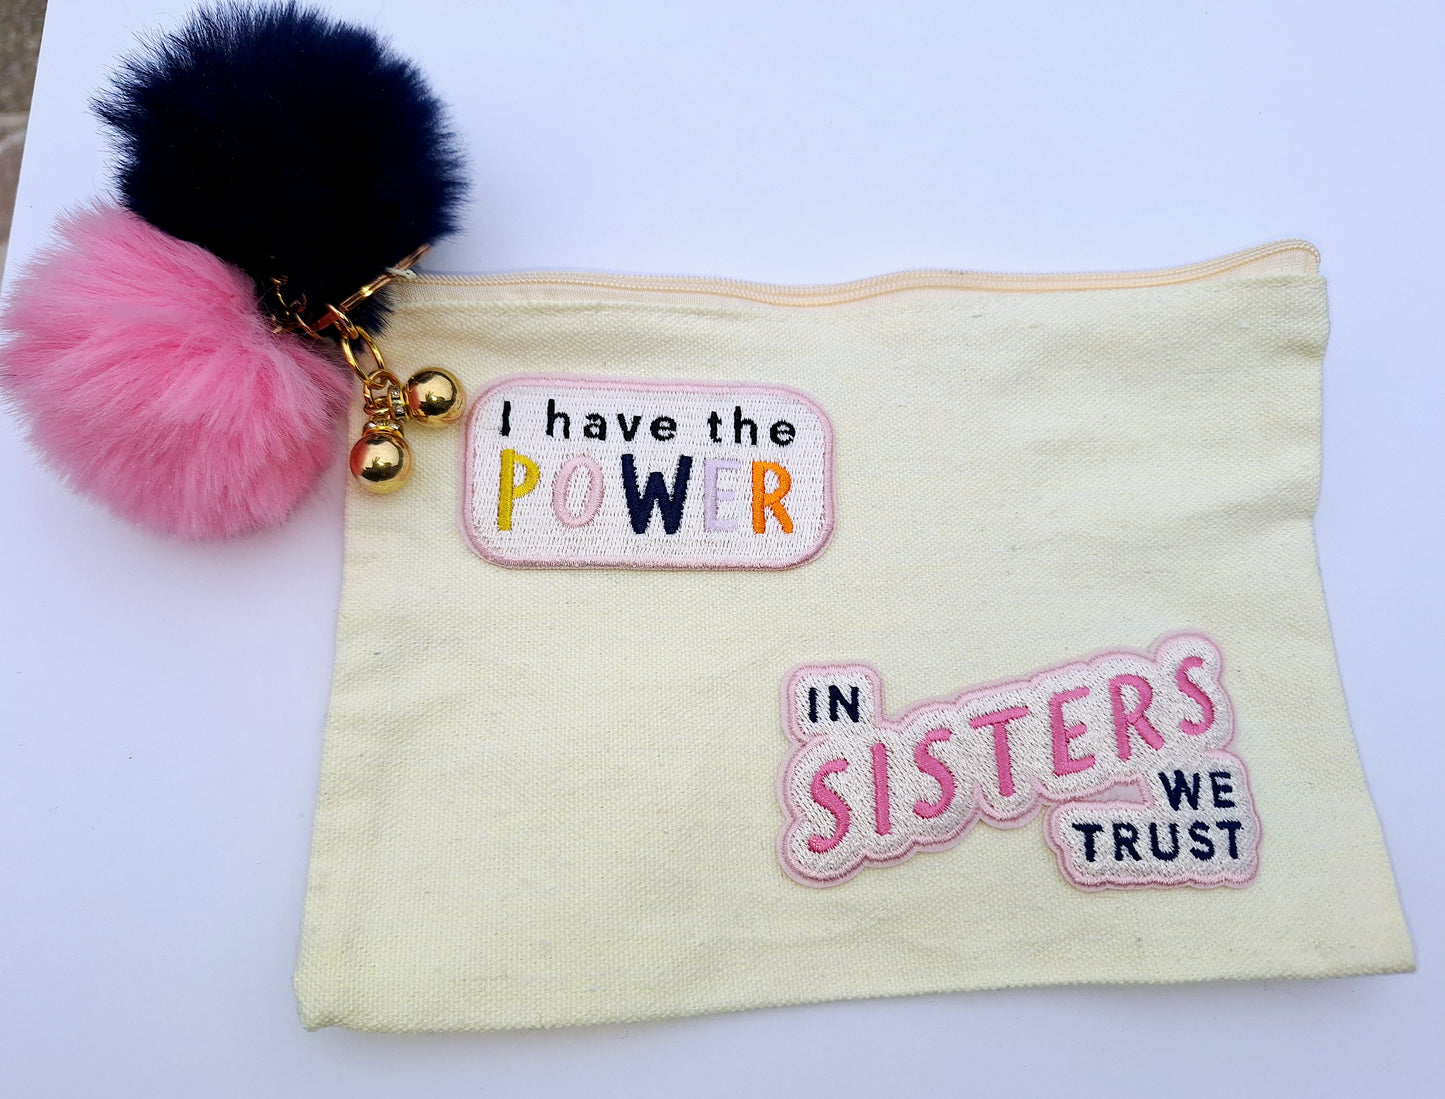 "I Have the Power/In Sisters We Trust" Medium Beige Canvas Cosmetics Bag with Blue/Pink Tassels/Gold Dangles